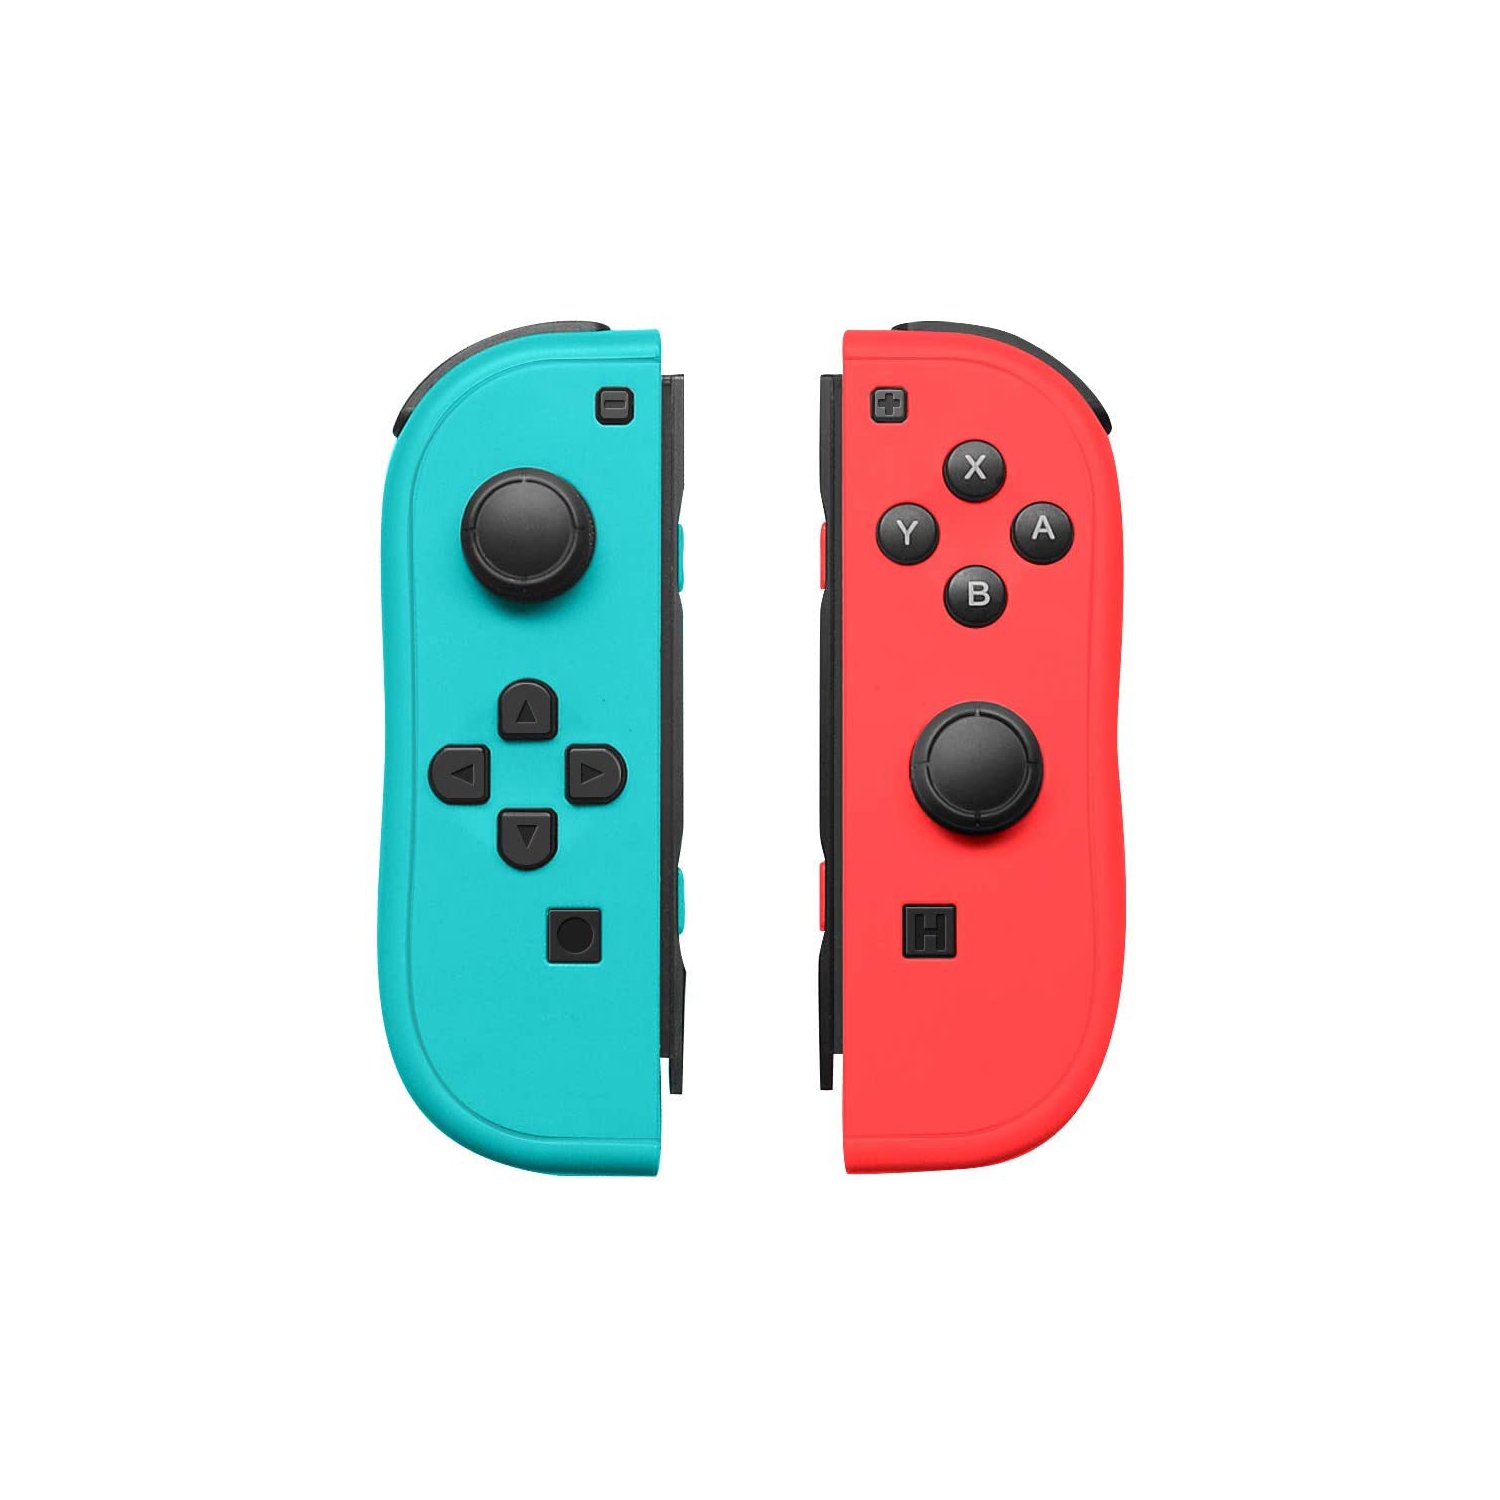 Joy-Con Controller Replacement for Nintendo Switch,JoyCon Controllers Replacement with Straps Support Wake-up Function (Blue and Red)